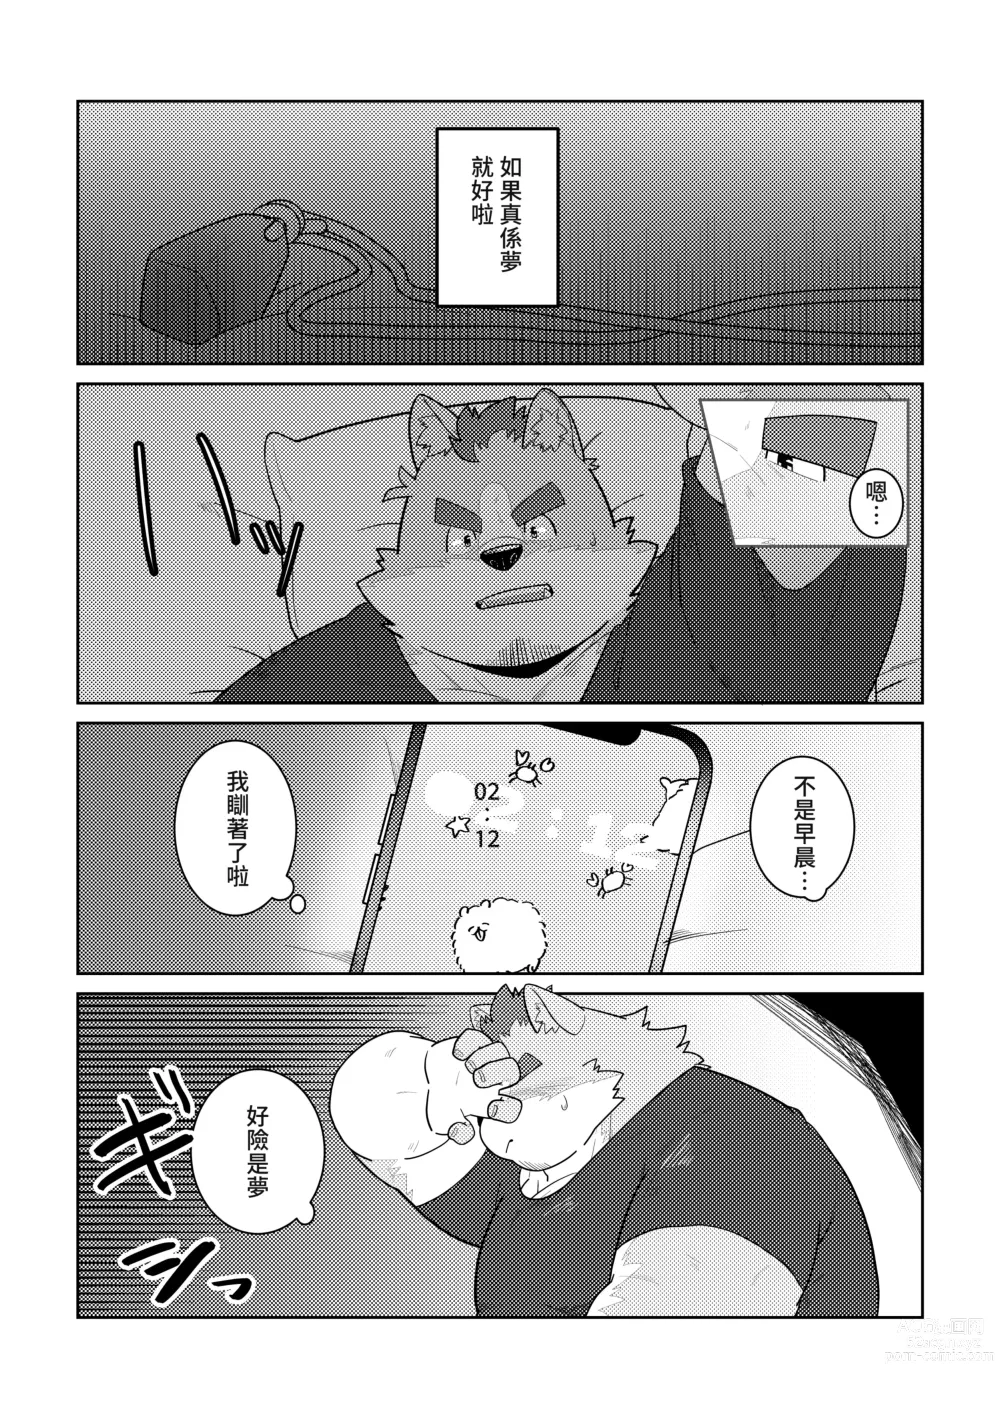 Page 11 of doujinshi 幽靈戀人